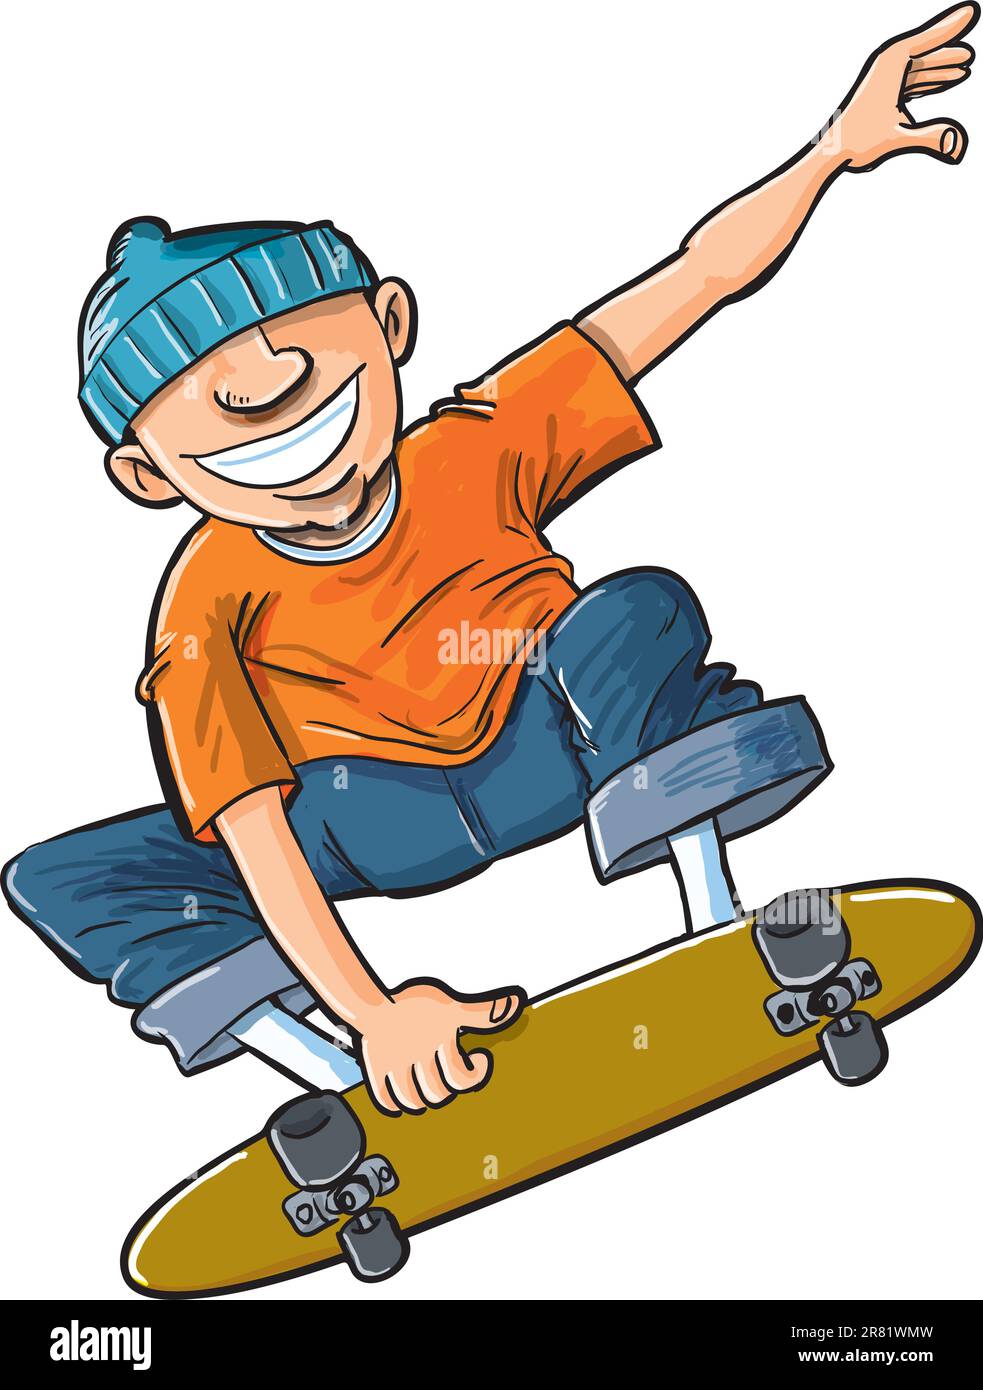 Cartoon of boy jumping on his skateboard. Isolated on white Stock Vector